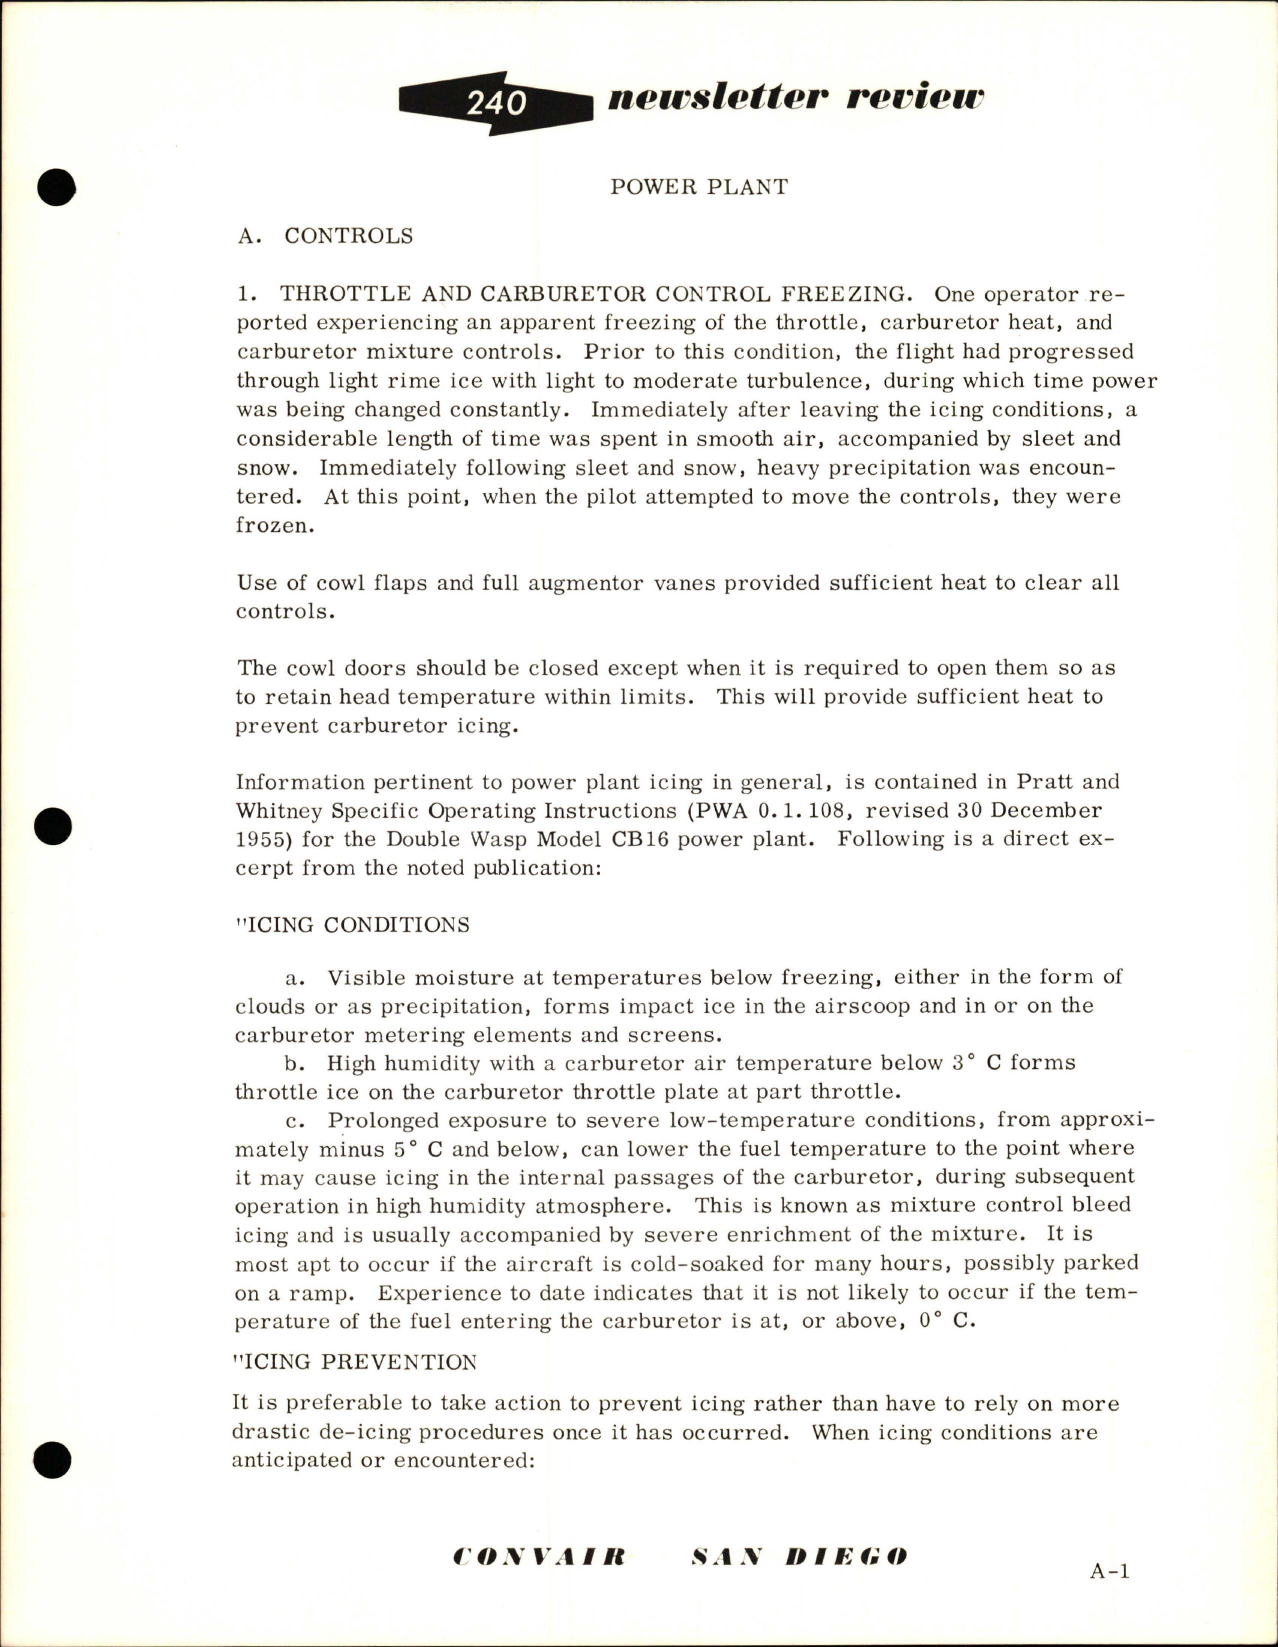 Sample page 7 from AirCorps Library document: Newsletter Review for Convair 240